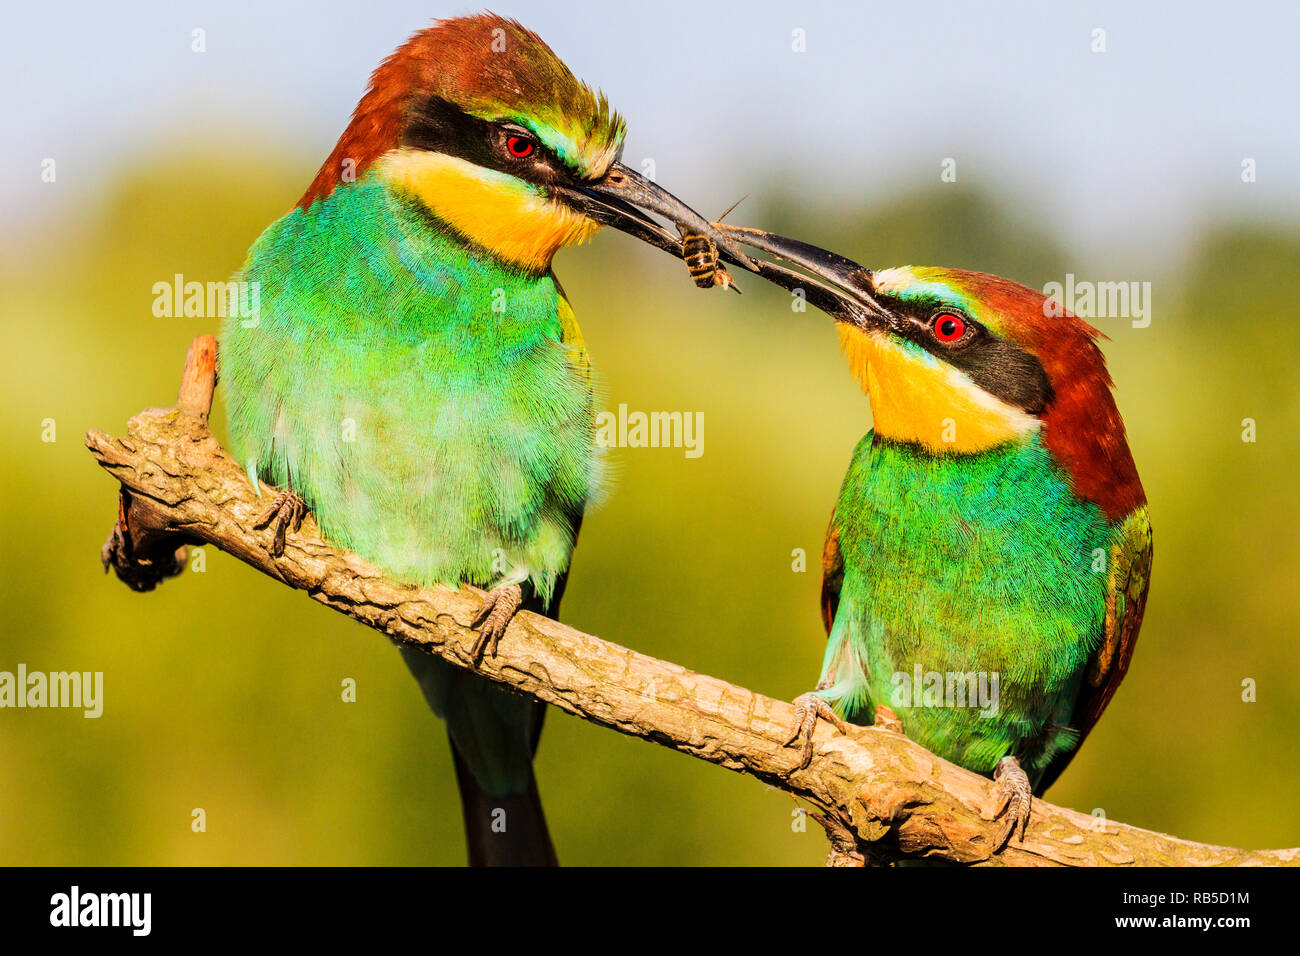 birds divided insects mating courtship, interesting animals Stock Photo